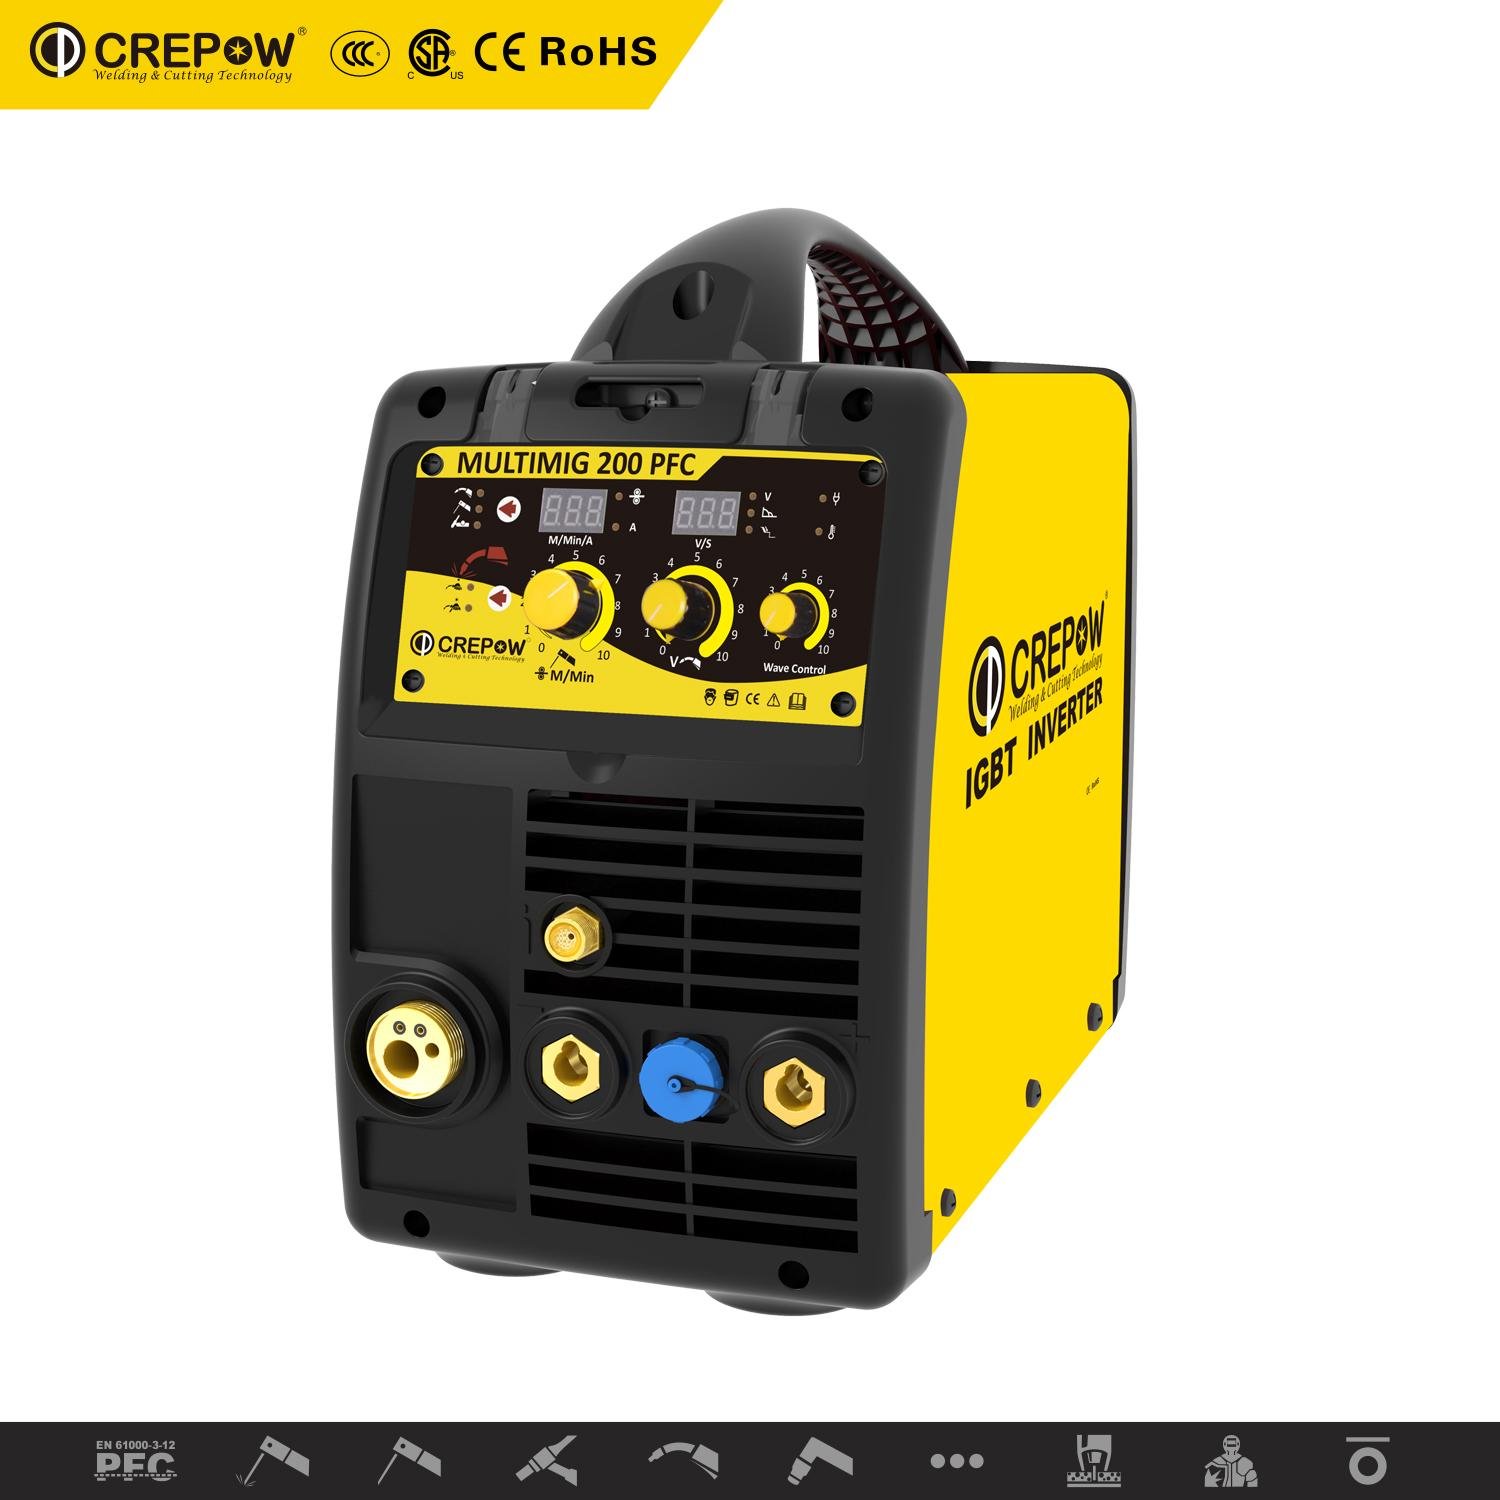 Crepow MULTIMIG200 PFC Inverter Multi Function MIG/STICK/LIFT TIG with PFC 3